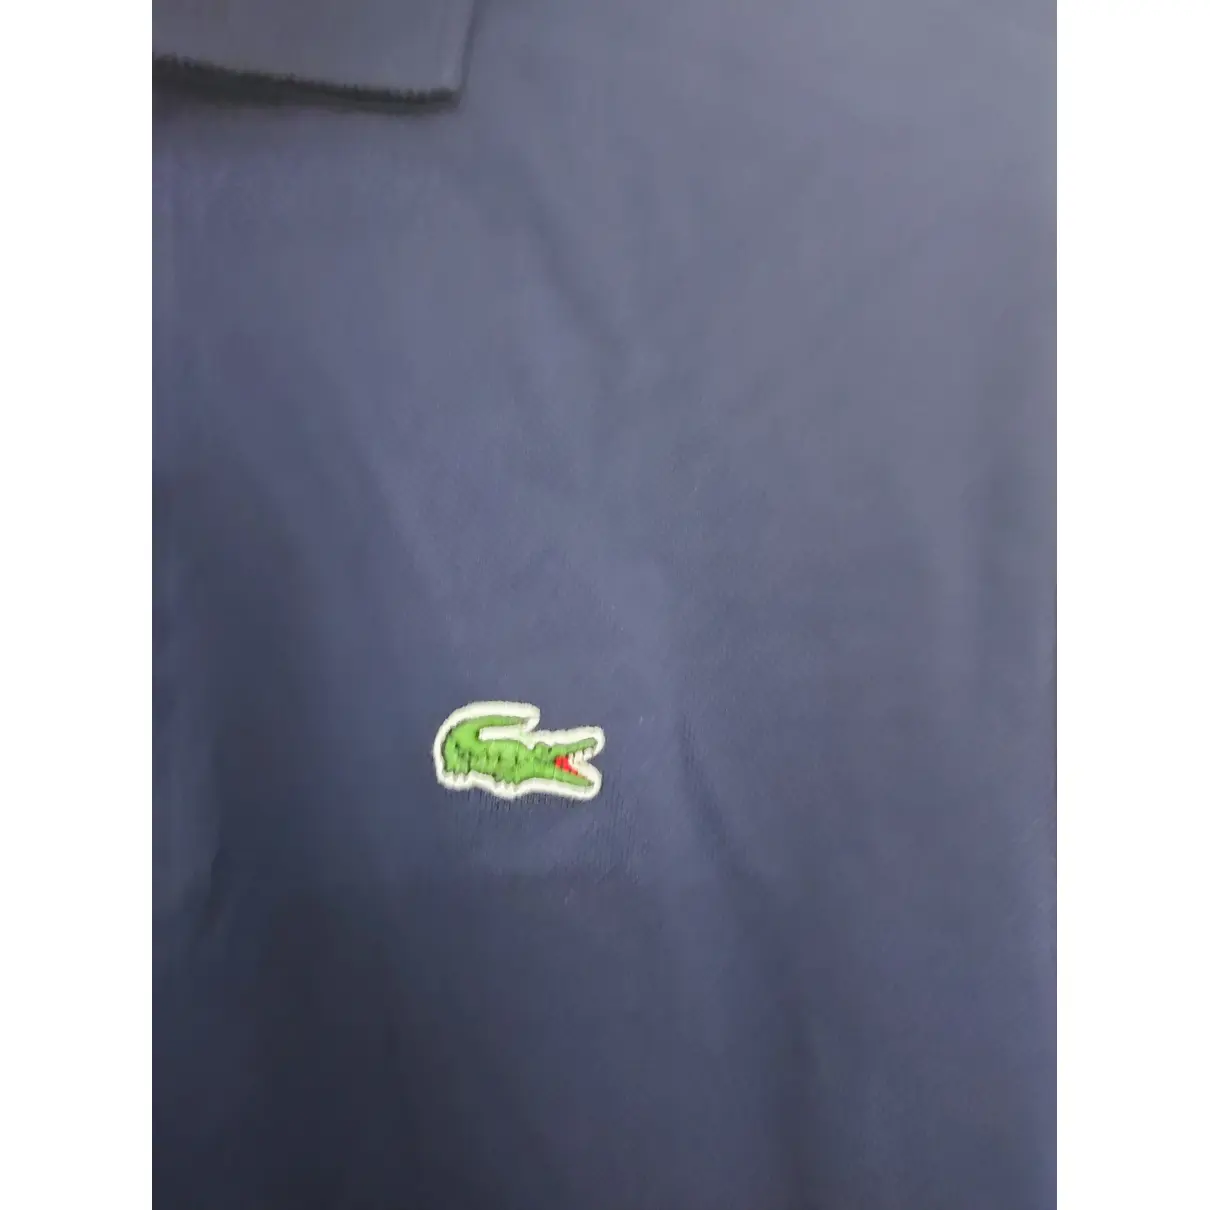 Buy Lacoste Polo shirt online